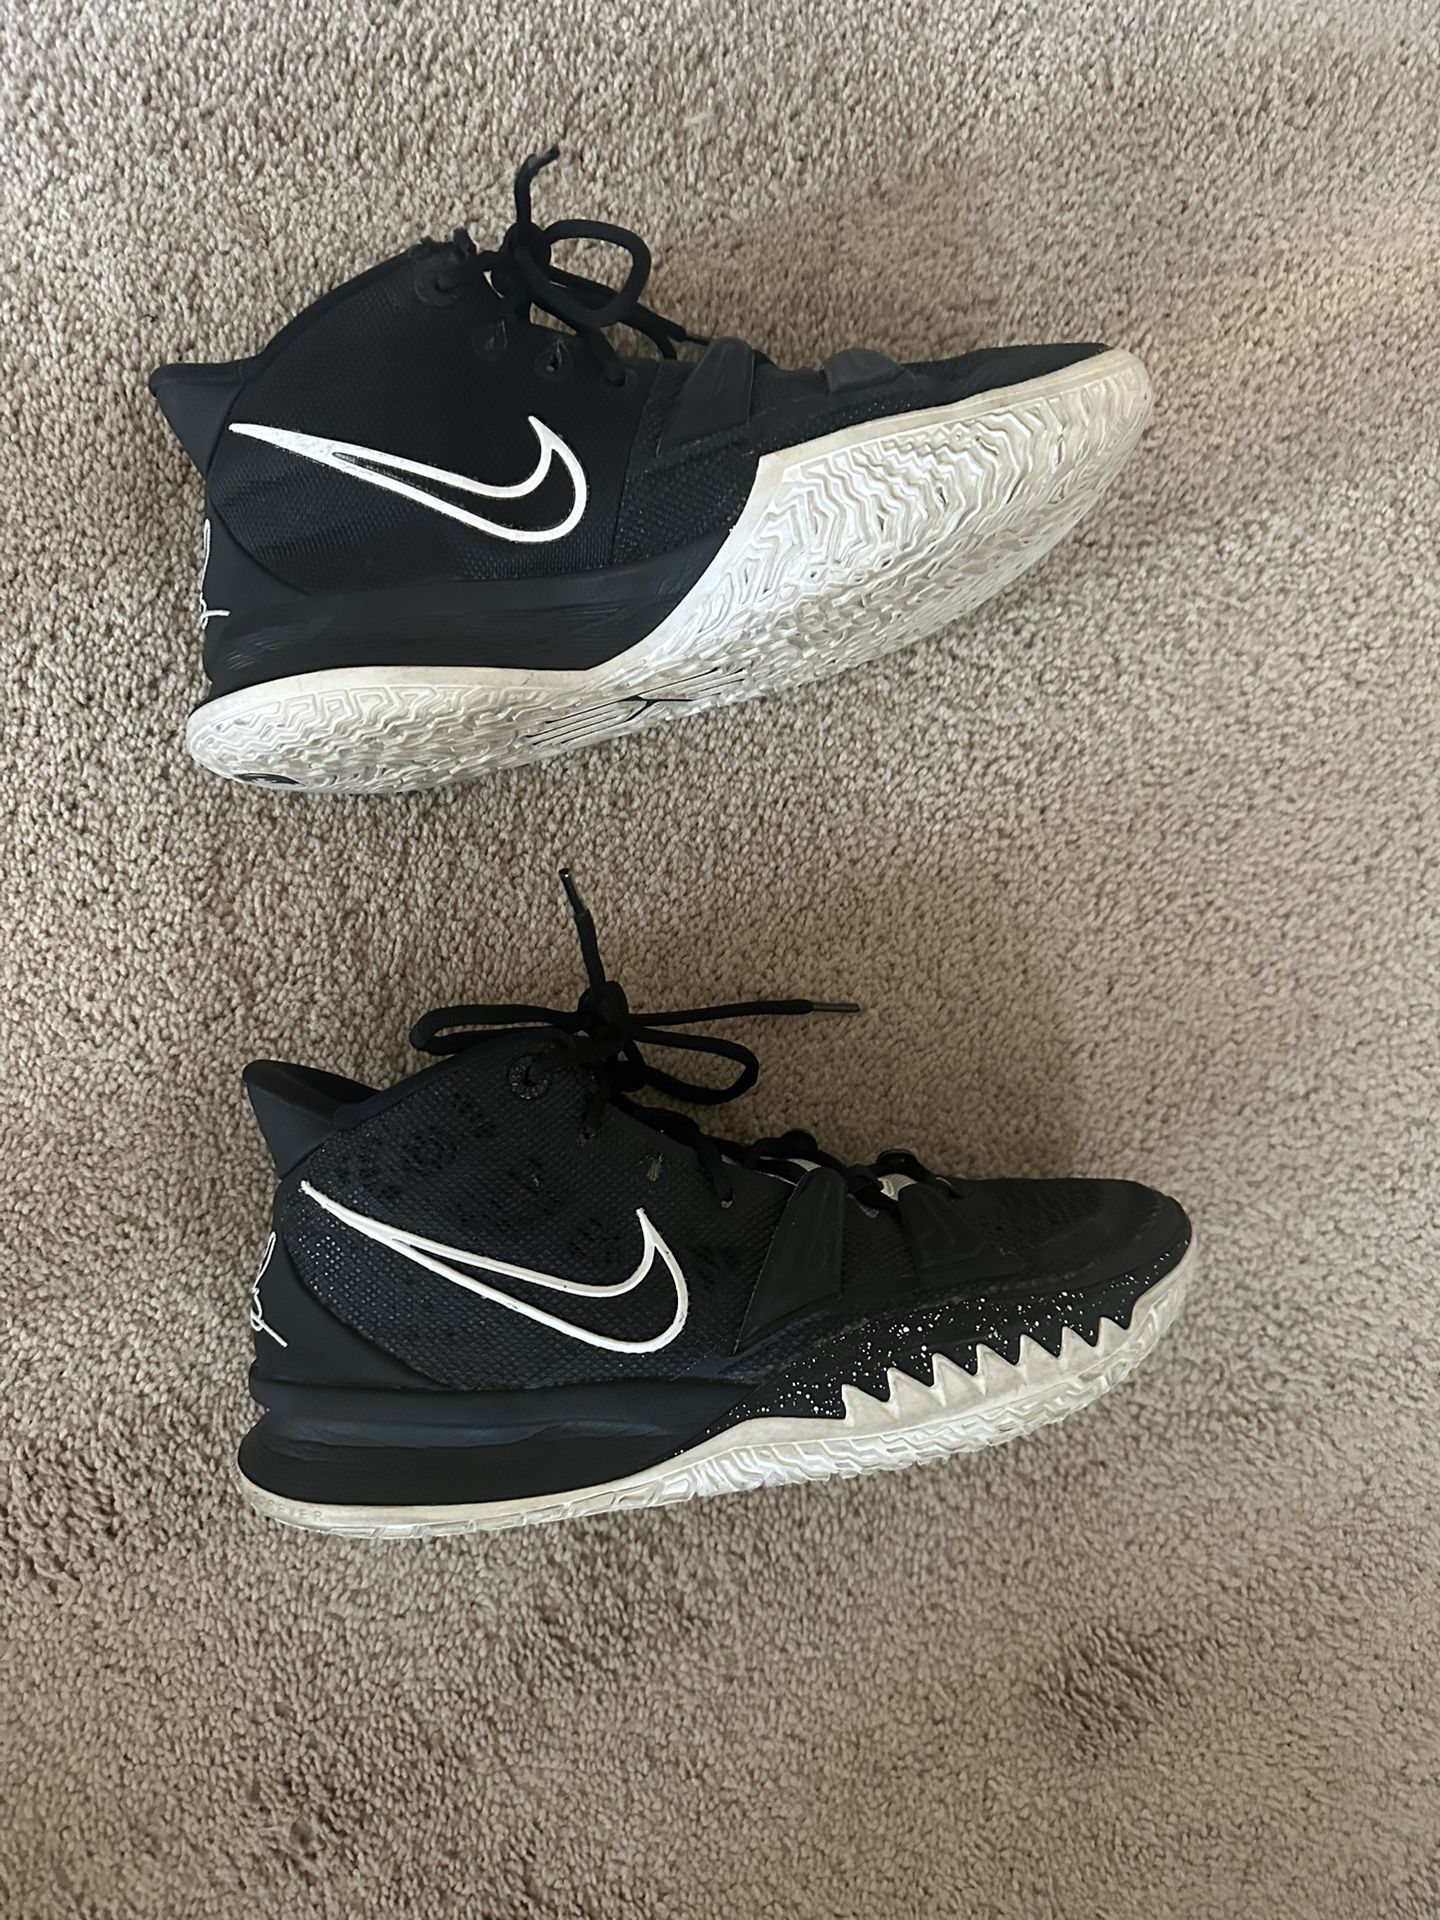 Kyries (Size 12)